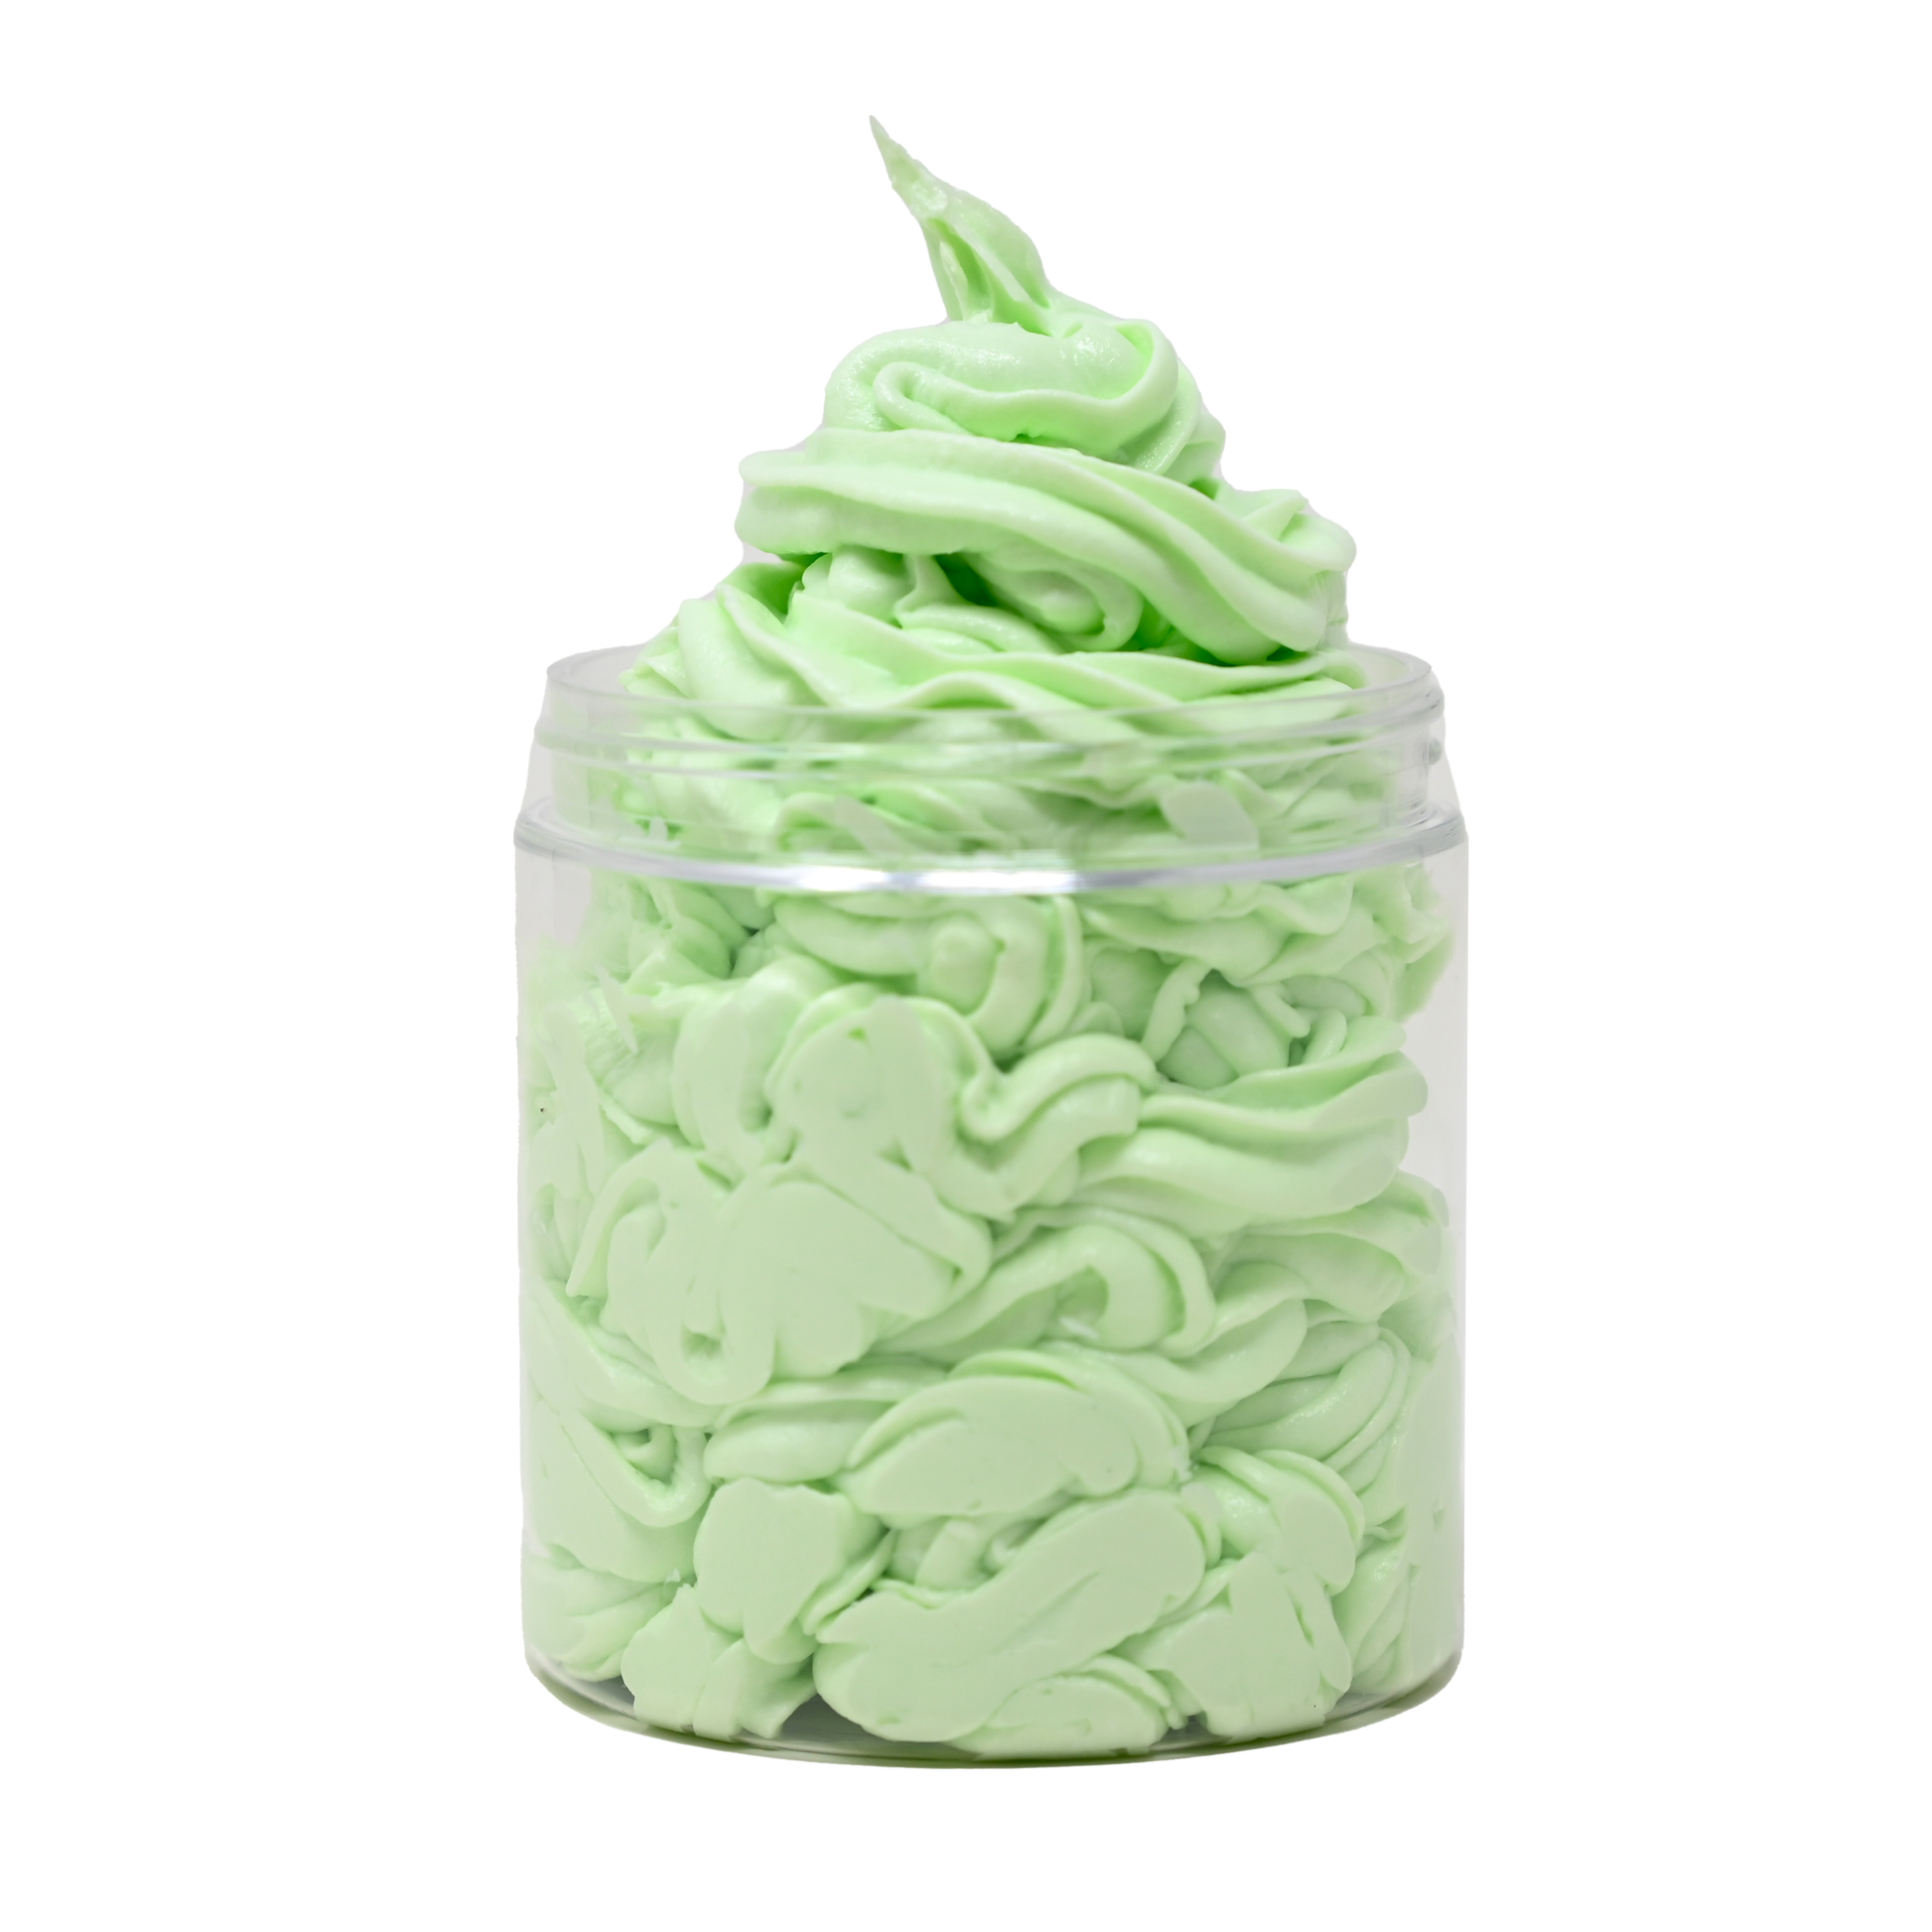 Cucumber Melon Whipped Body Soap